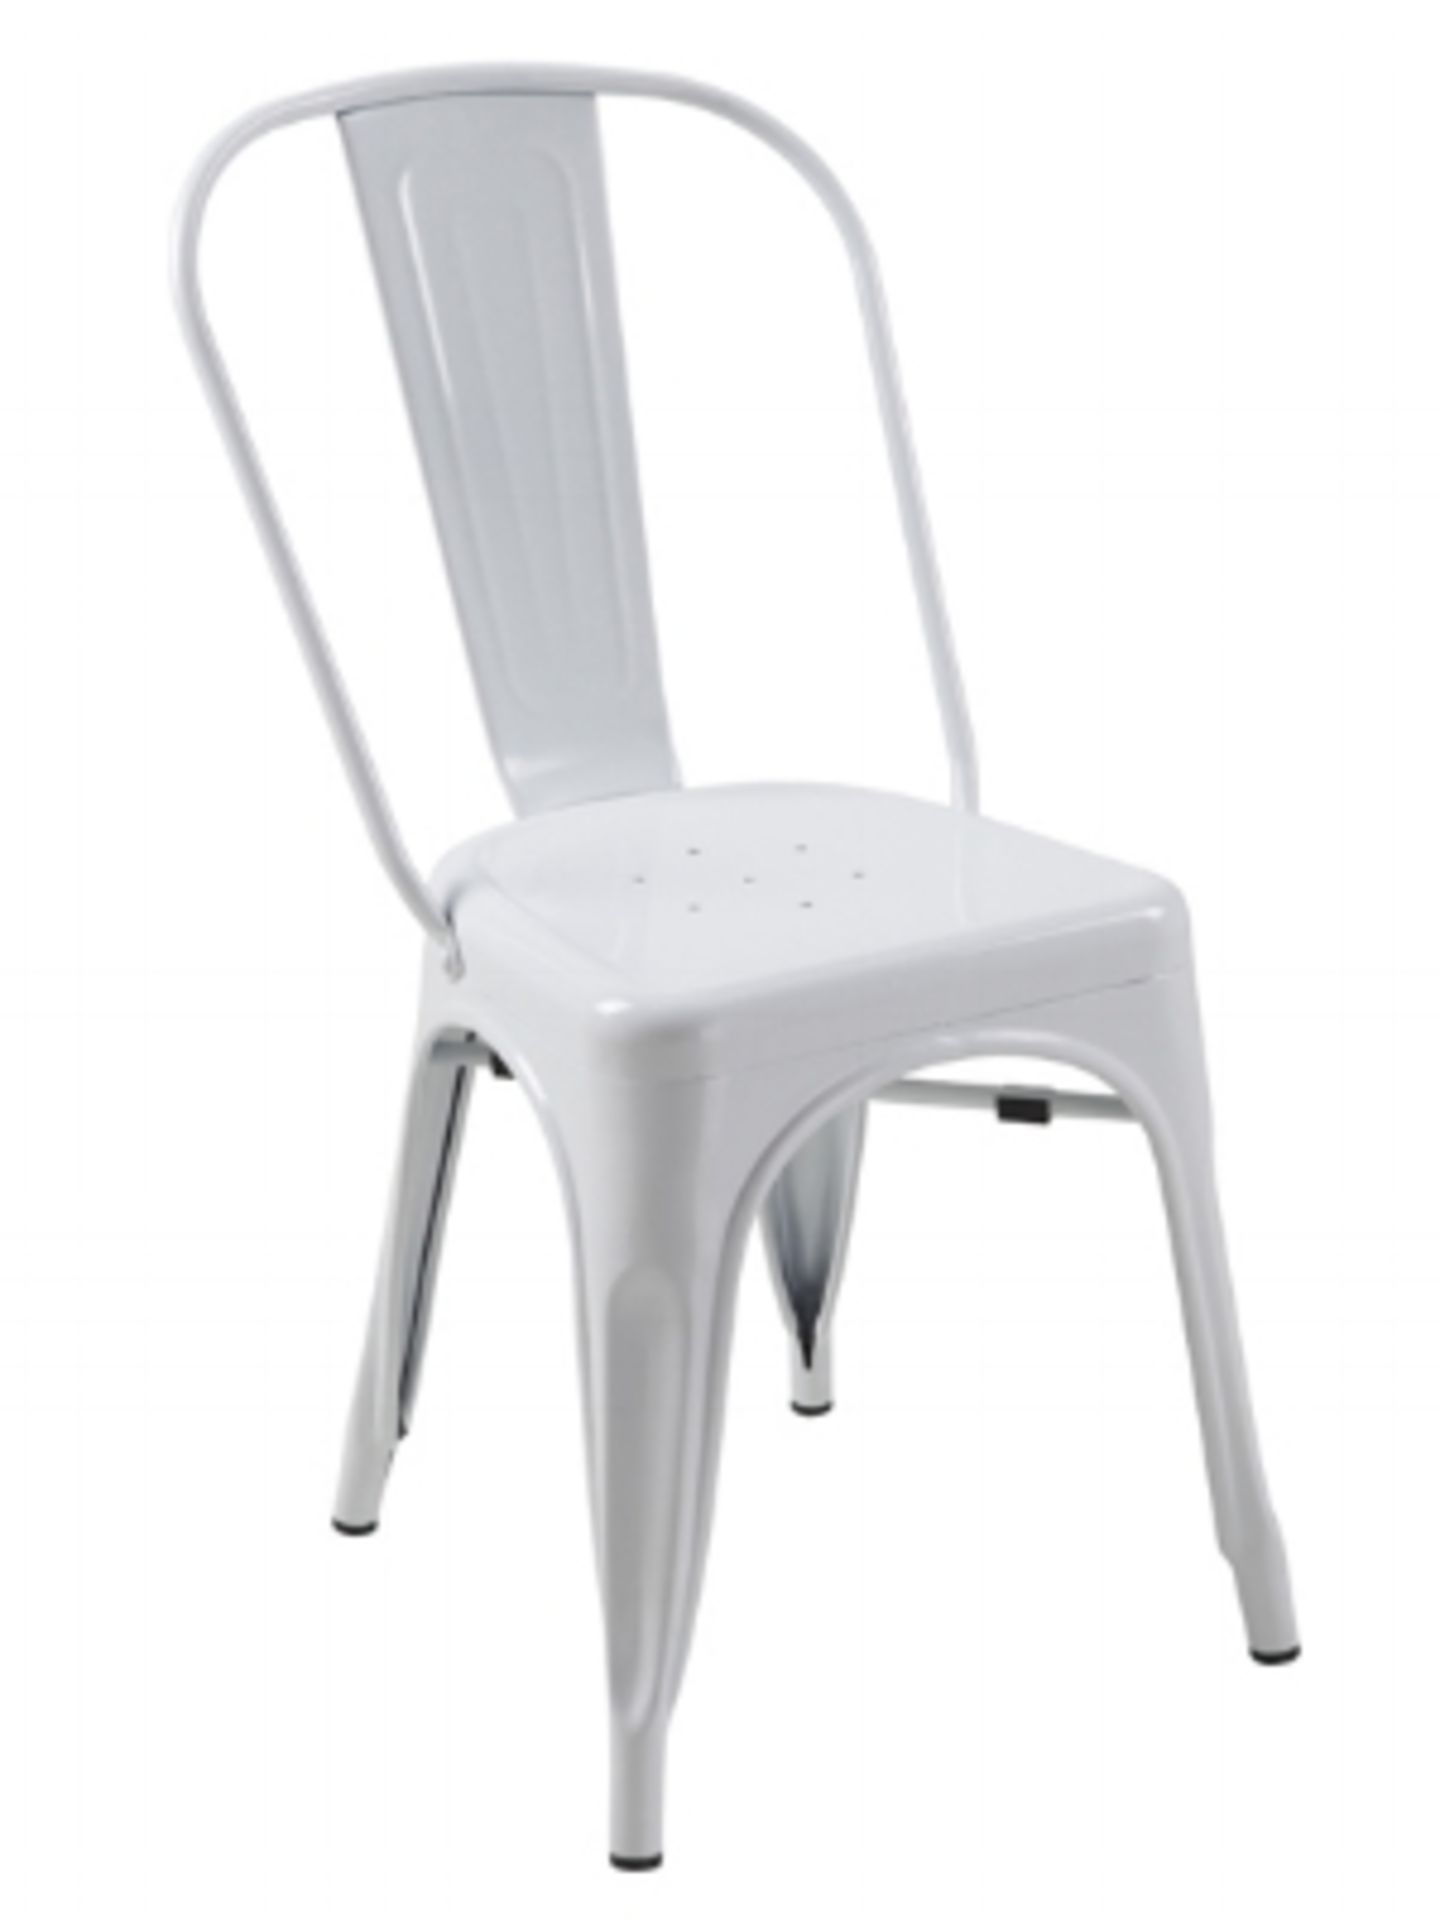 Manhattan Side Chair- White, T-5816. Powder Coated epoxy finish on e-coated steel, or clear on raw